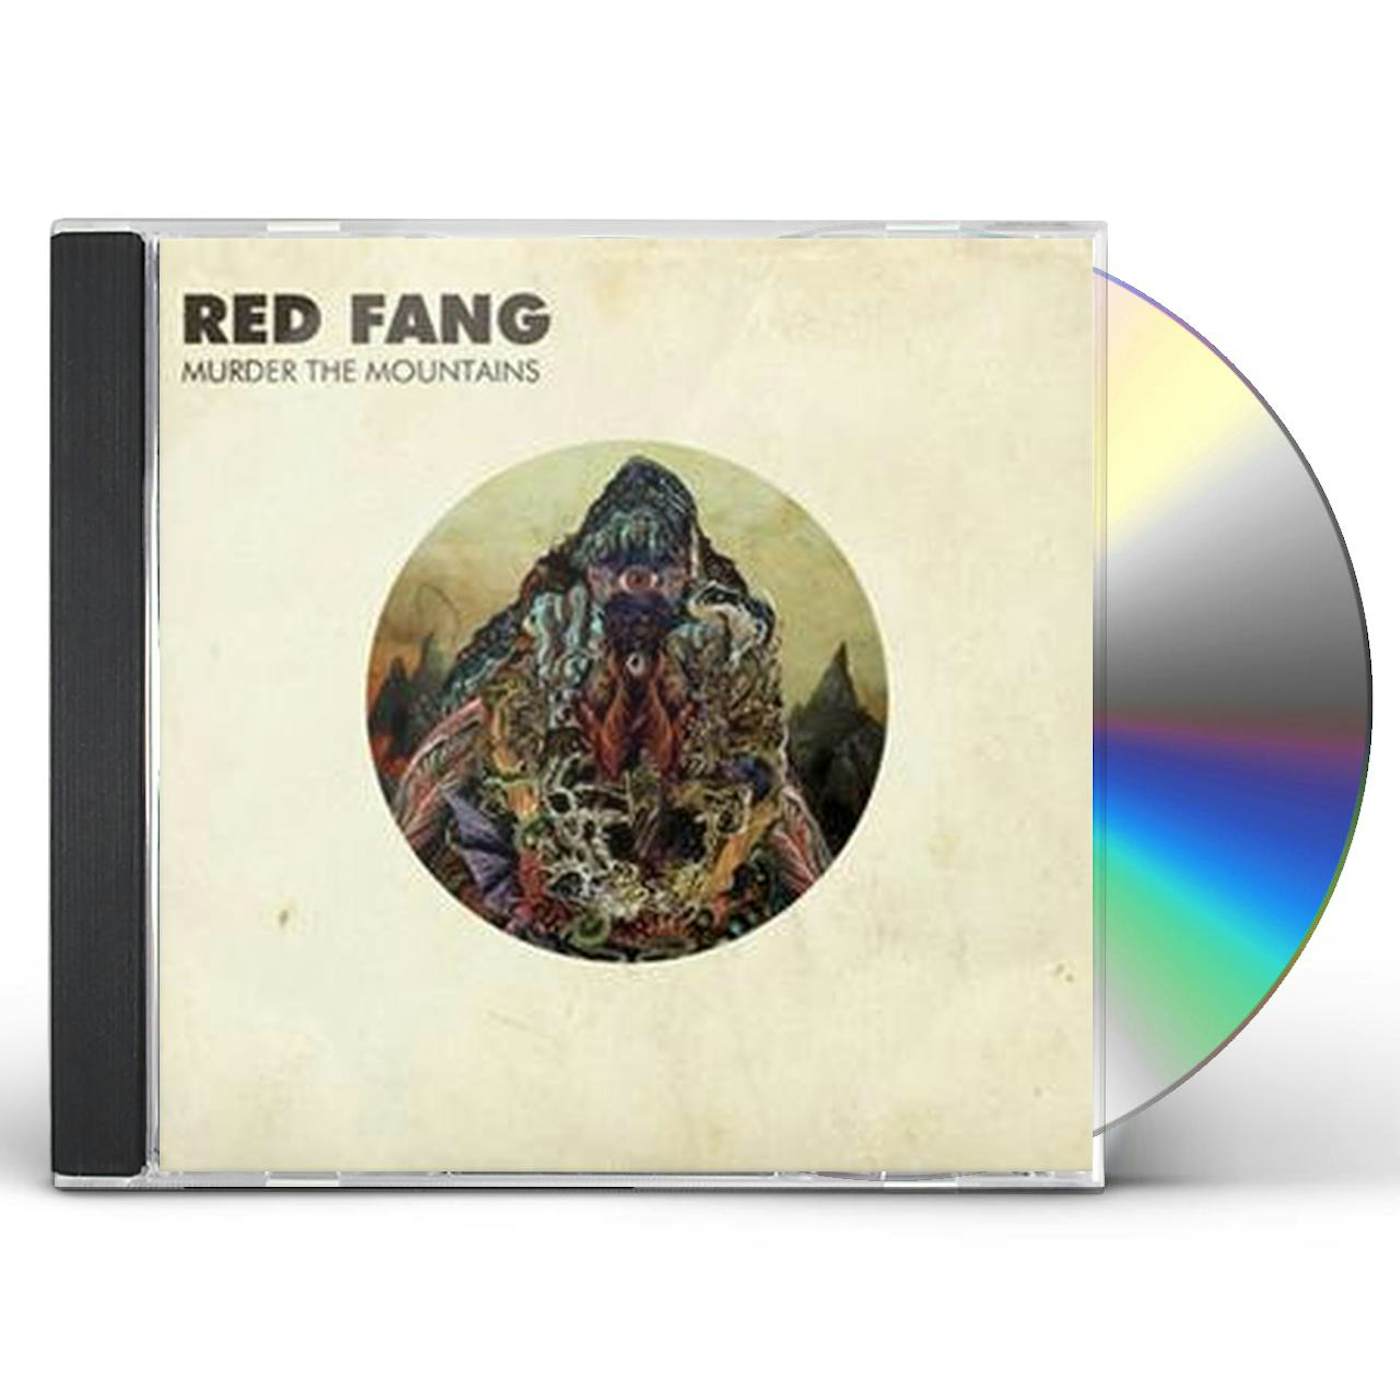 Red Fang MURDER THE MOUNTAINS CD